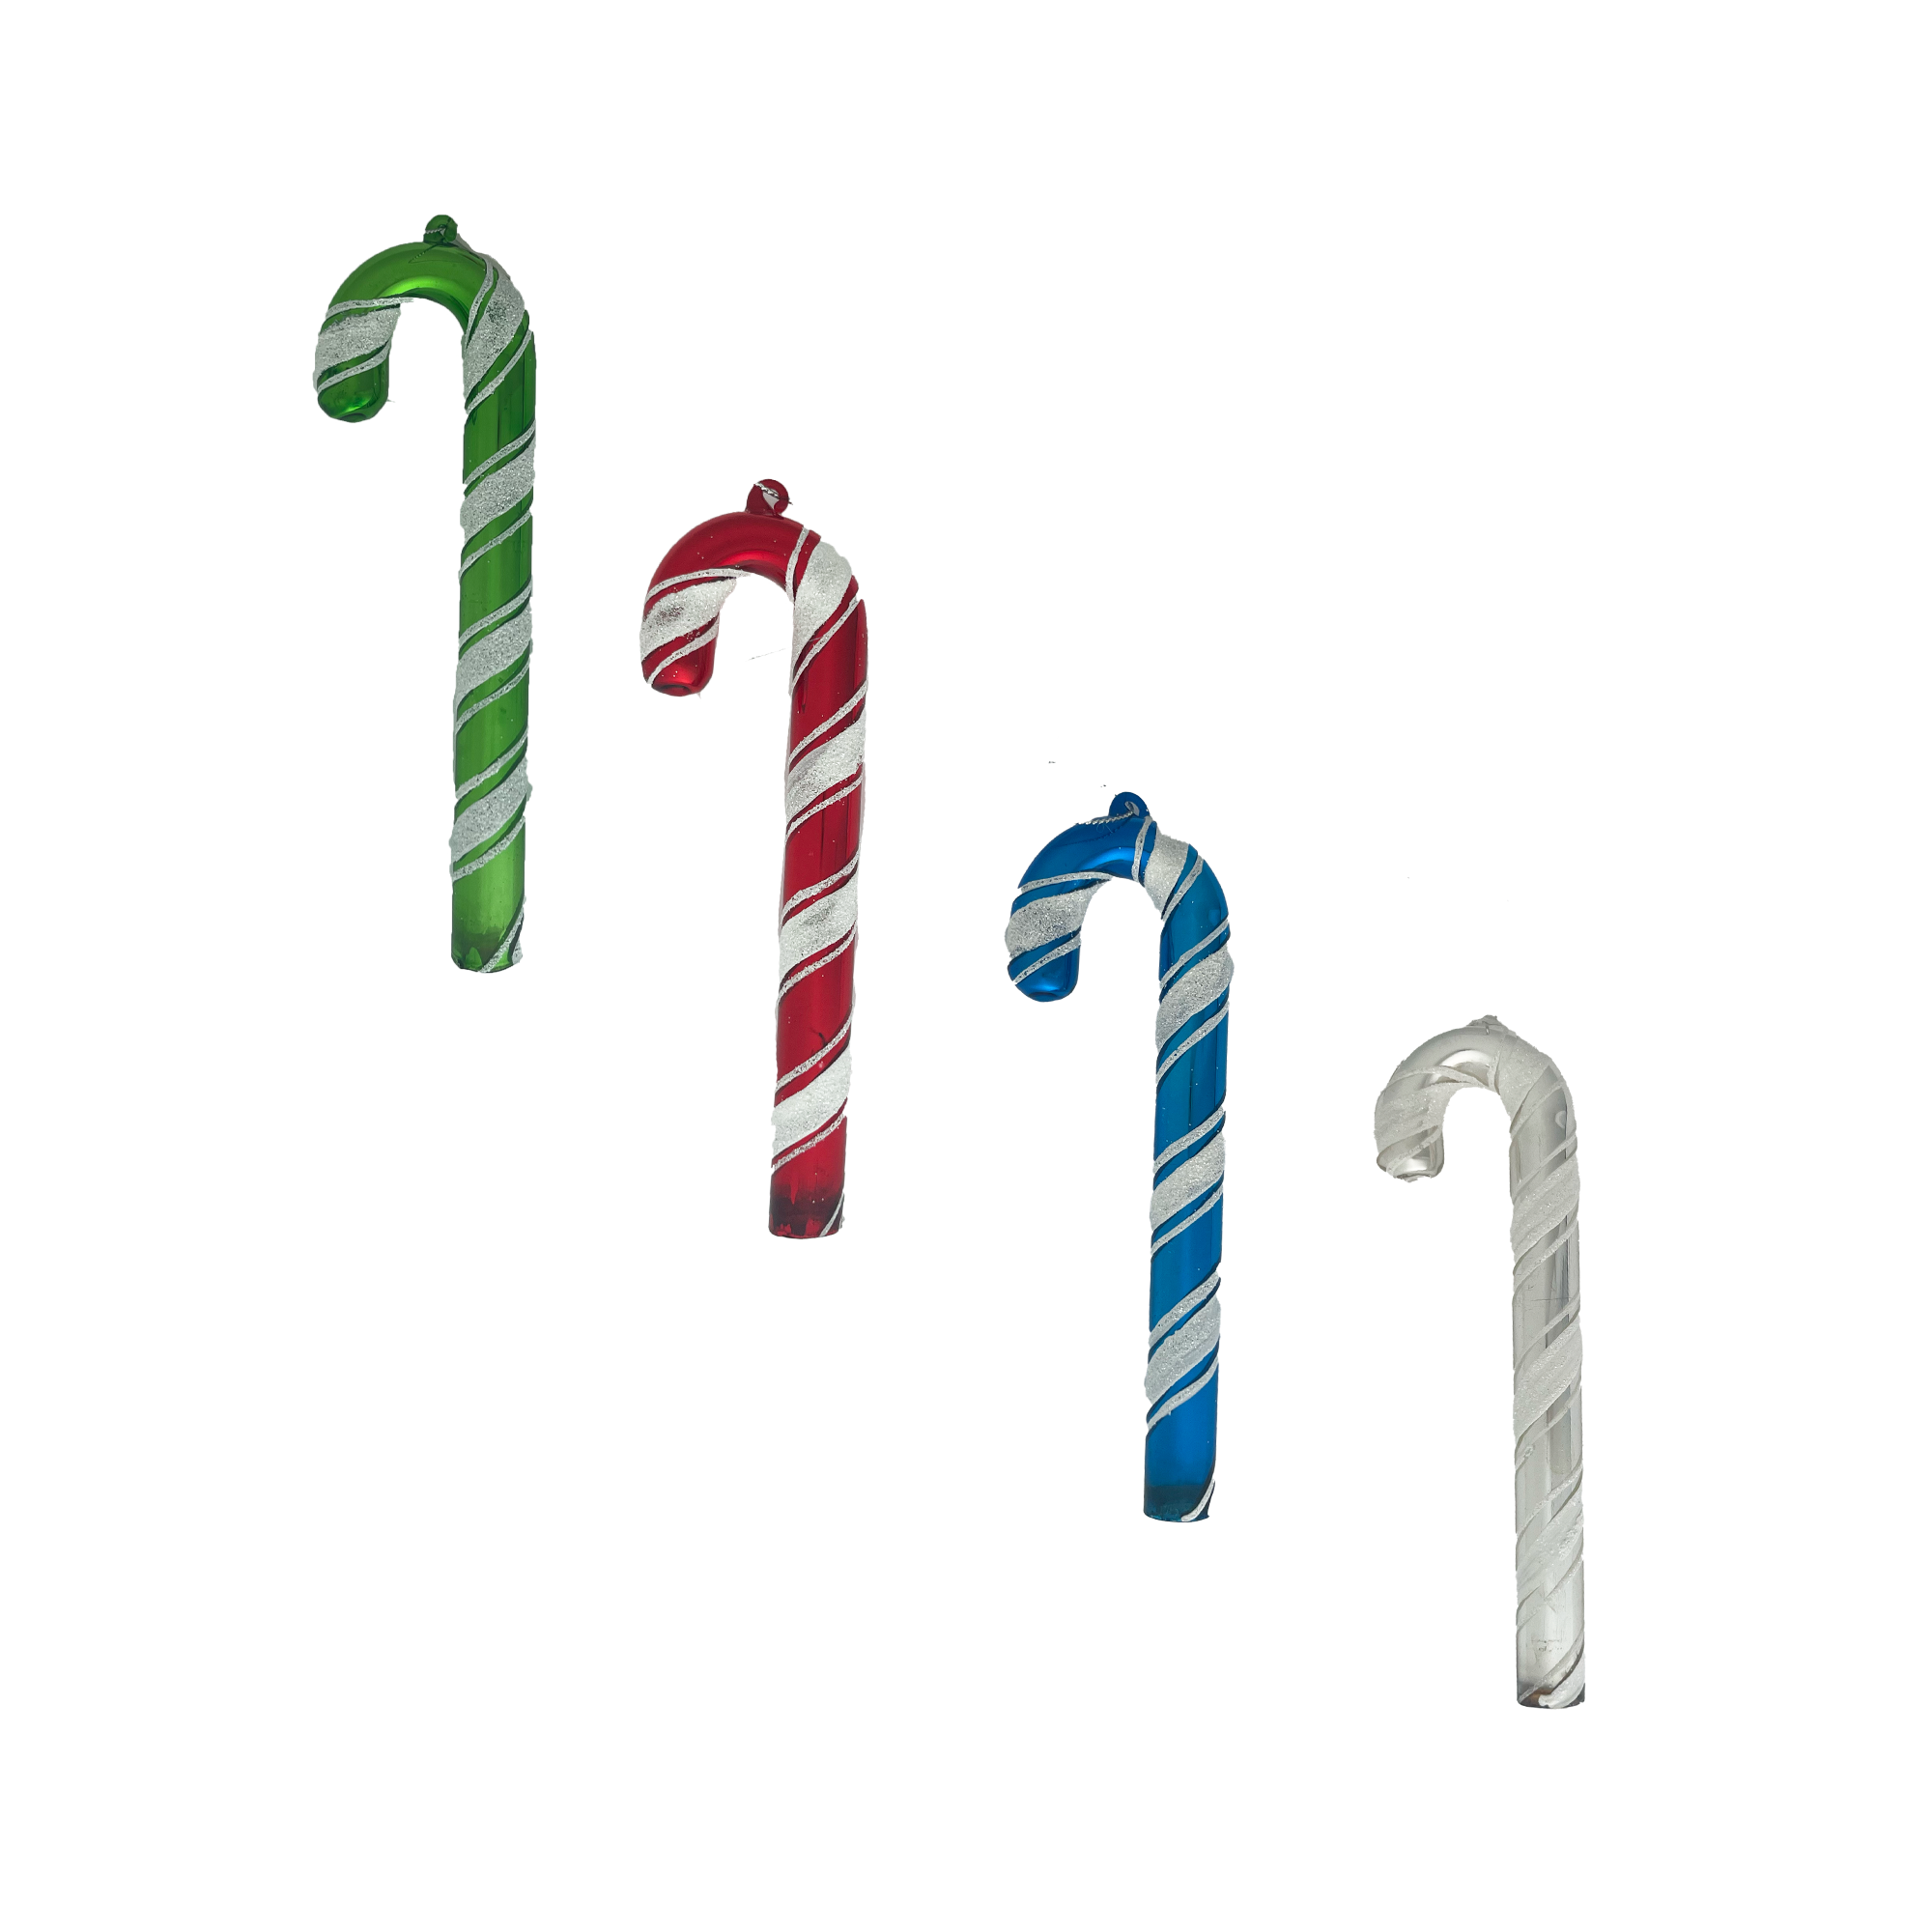 Christmas Red & White Candy Cane Print Party Straws